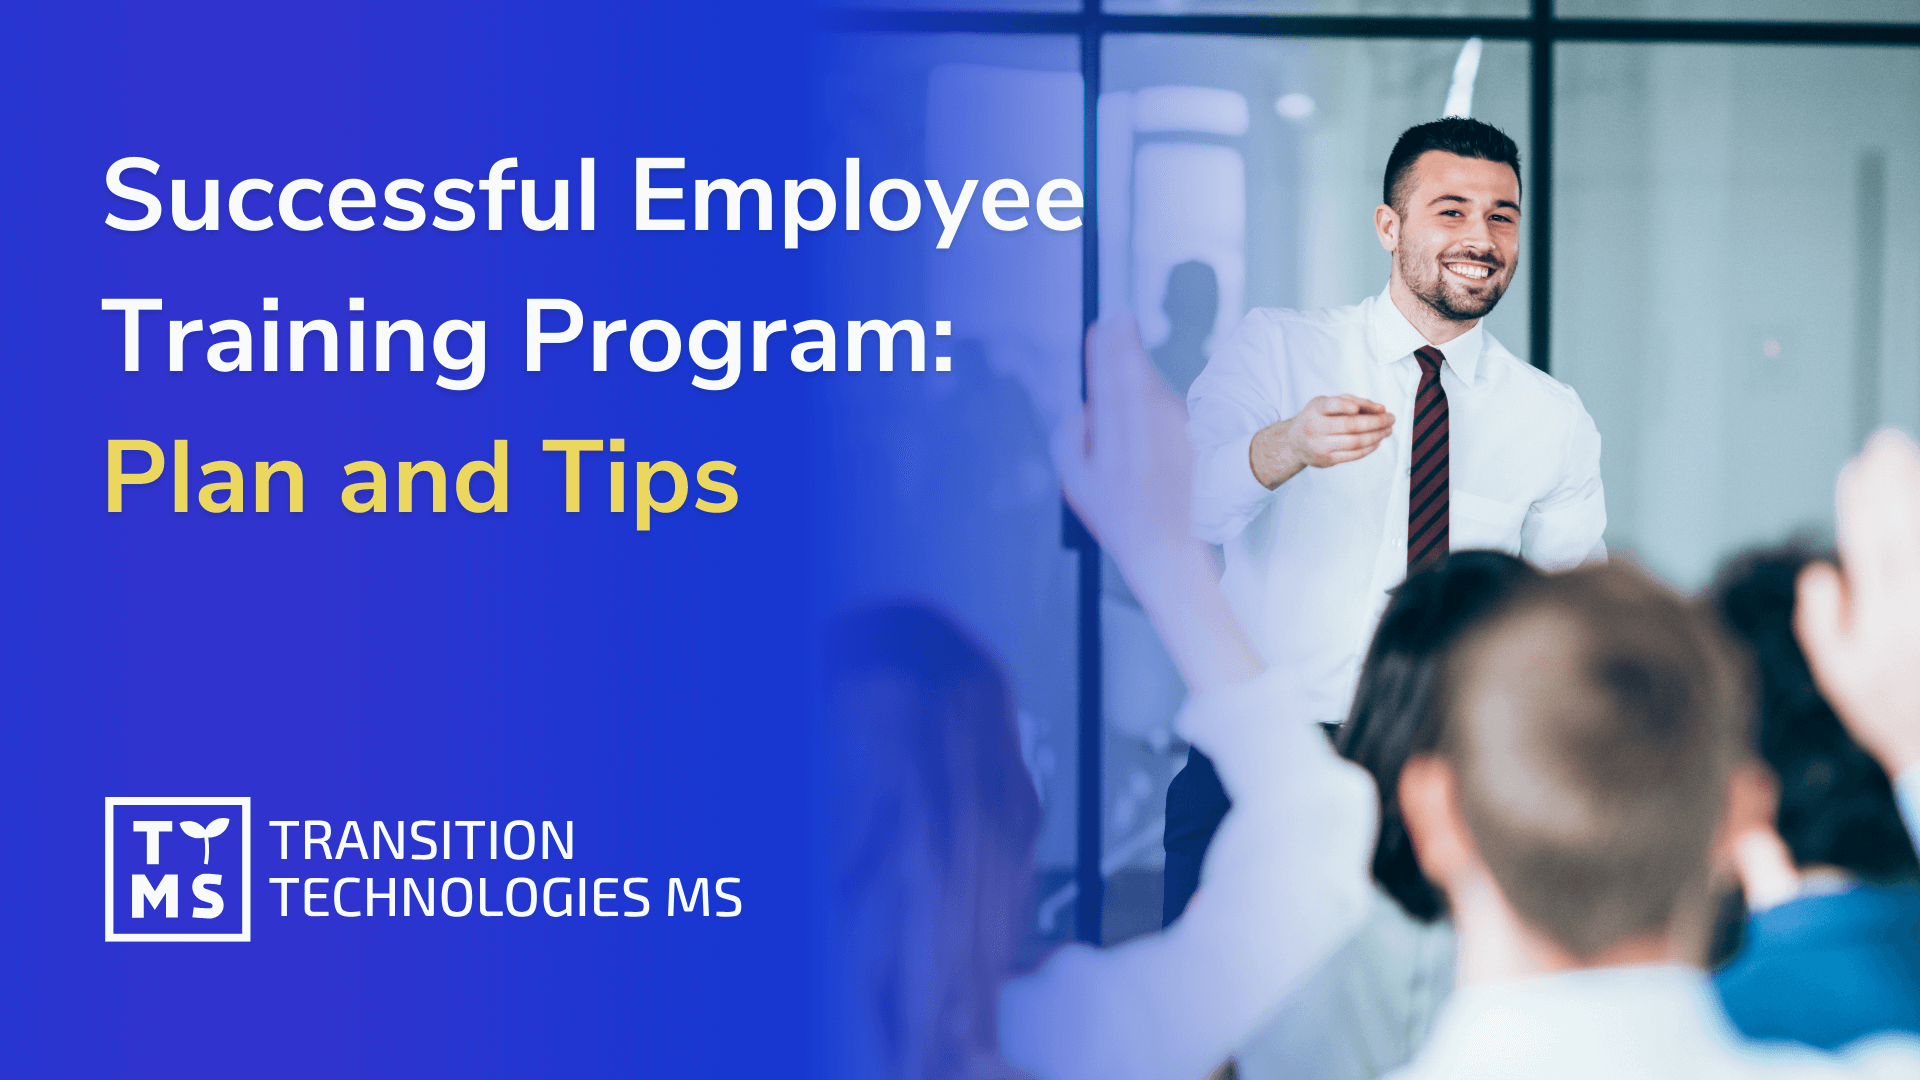 Successful Employee Training Program: Plan and Tips